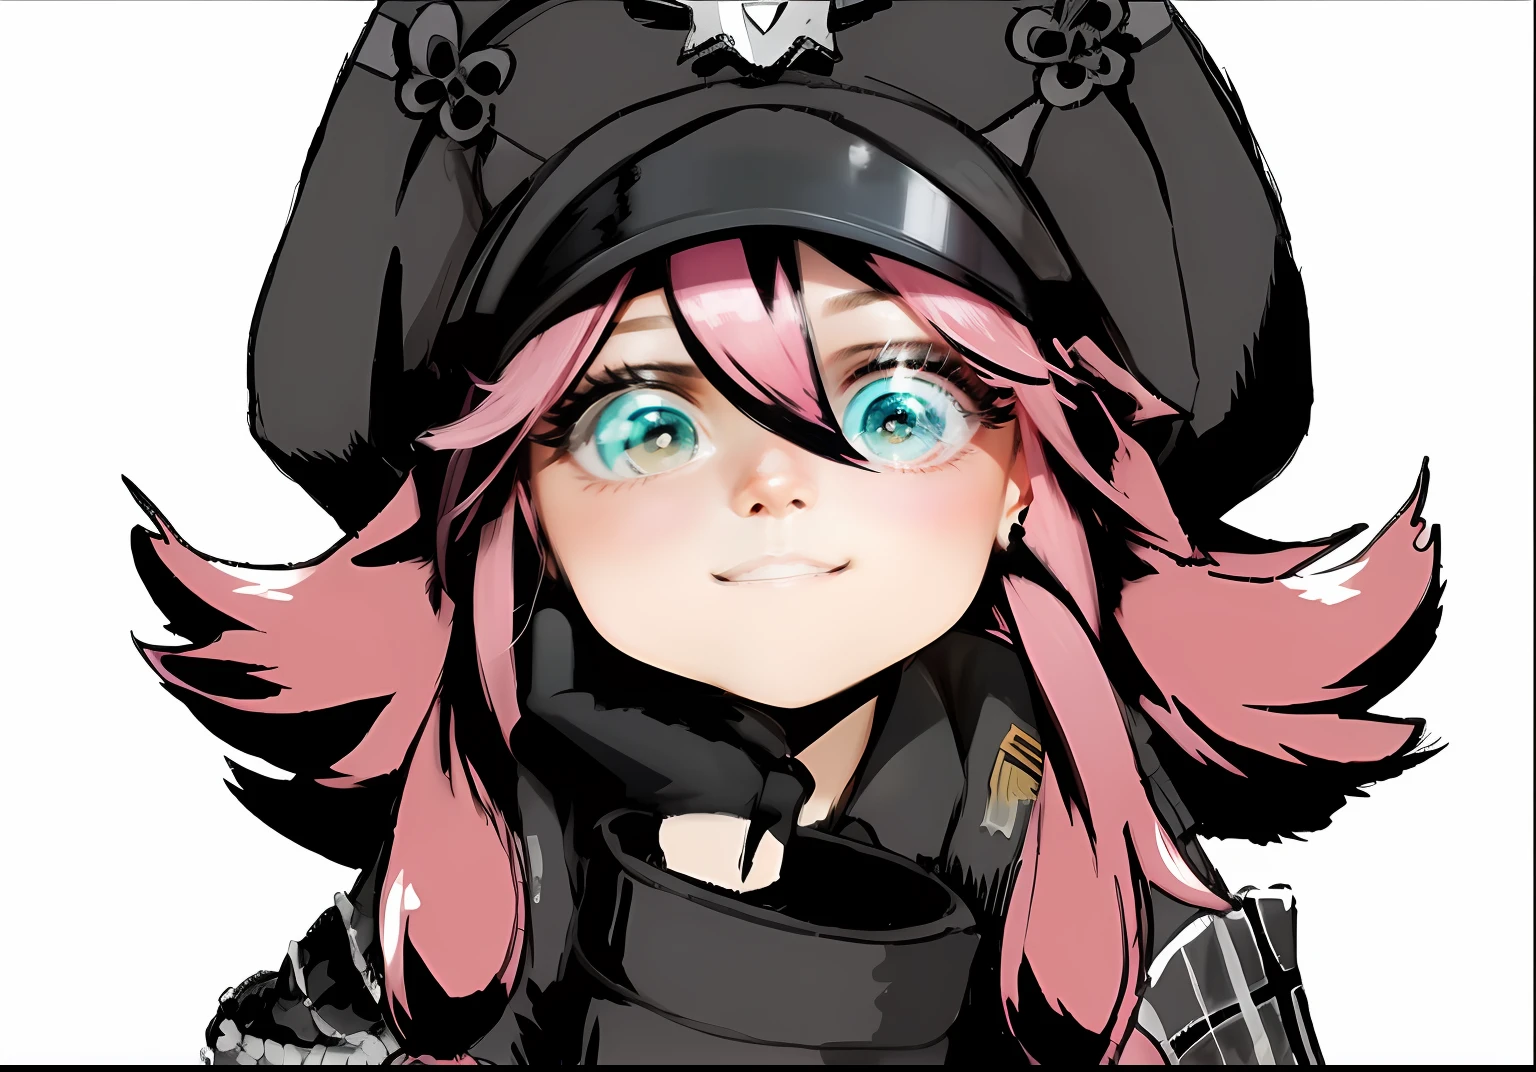 Pink hair, black military uniform, black military cap, hand on the head, girly smile